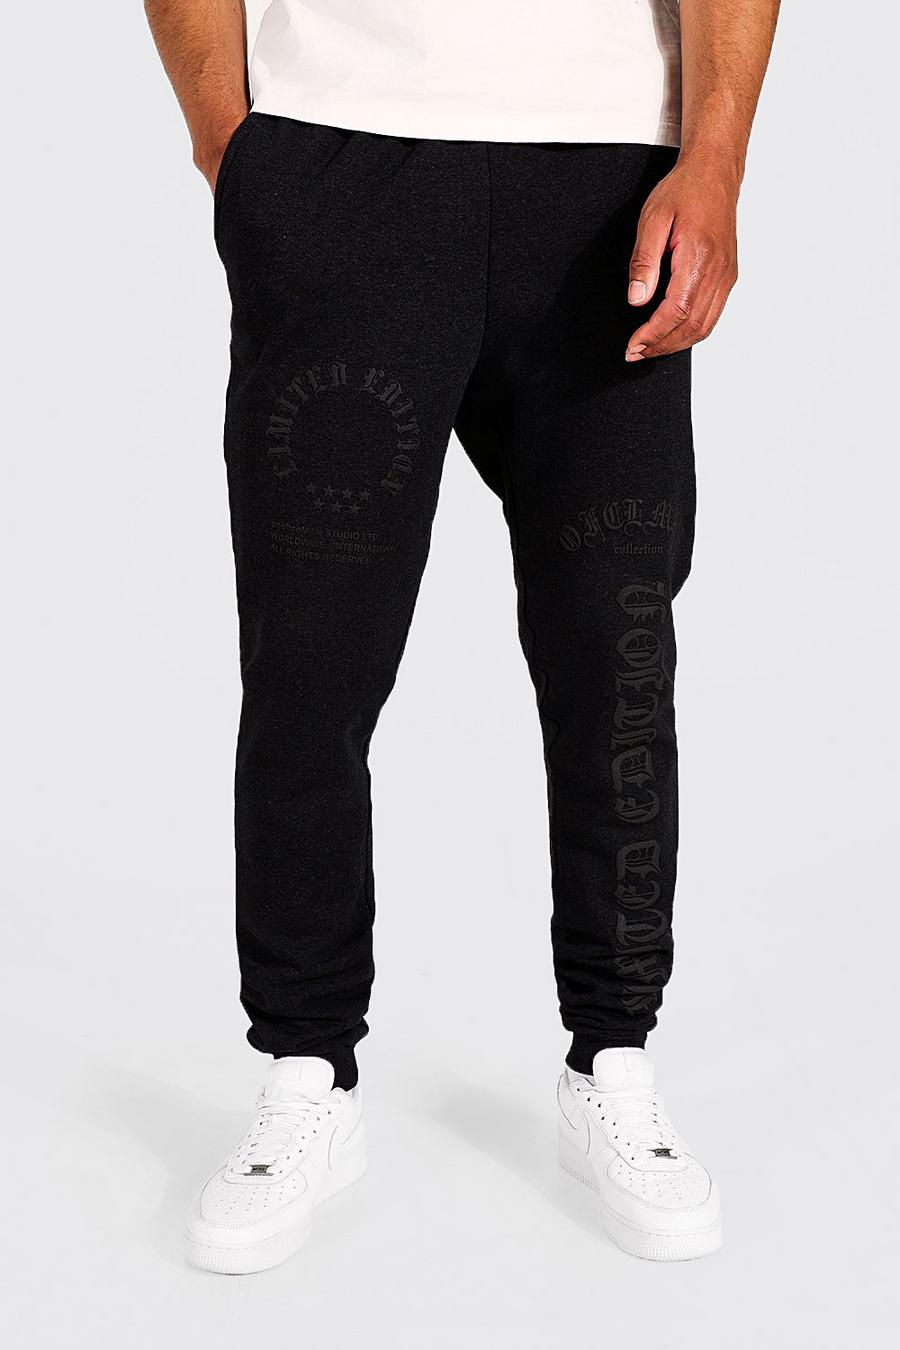 Charcoal Tall Limited Edition Joggingbroek image number 1